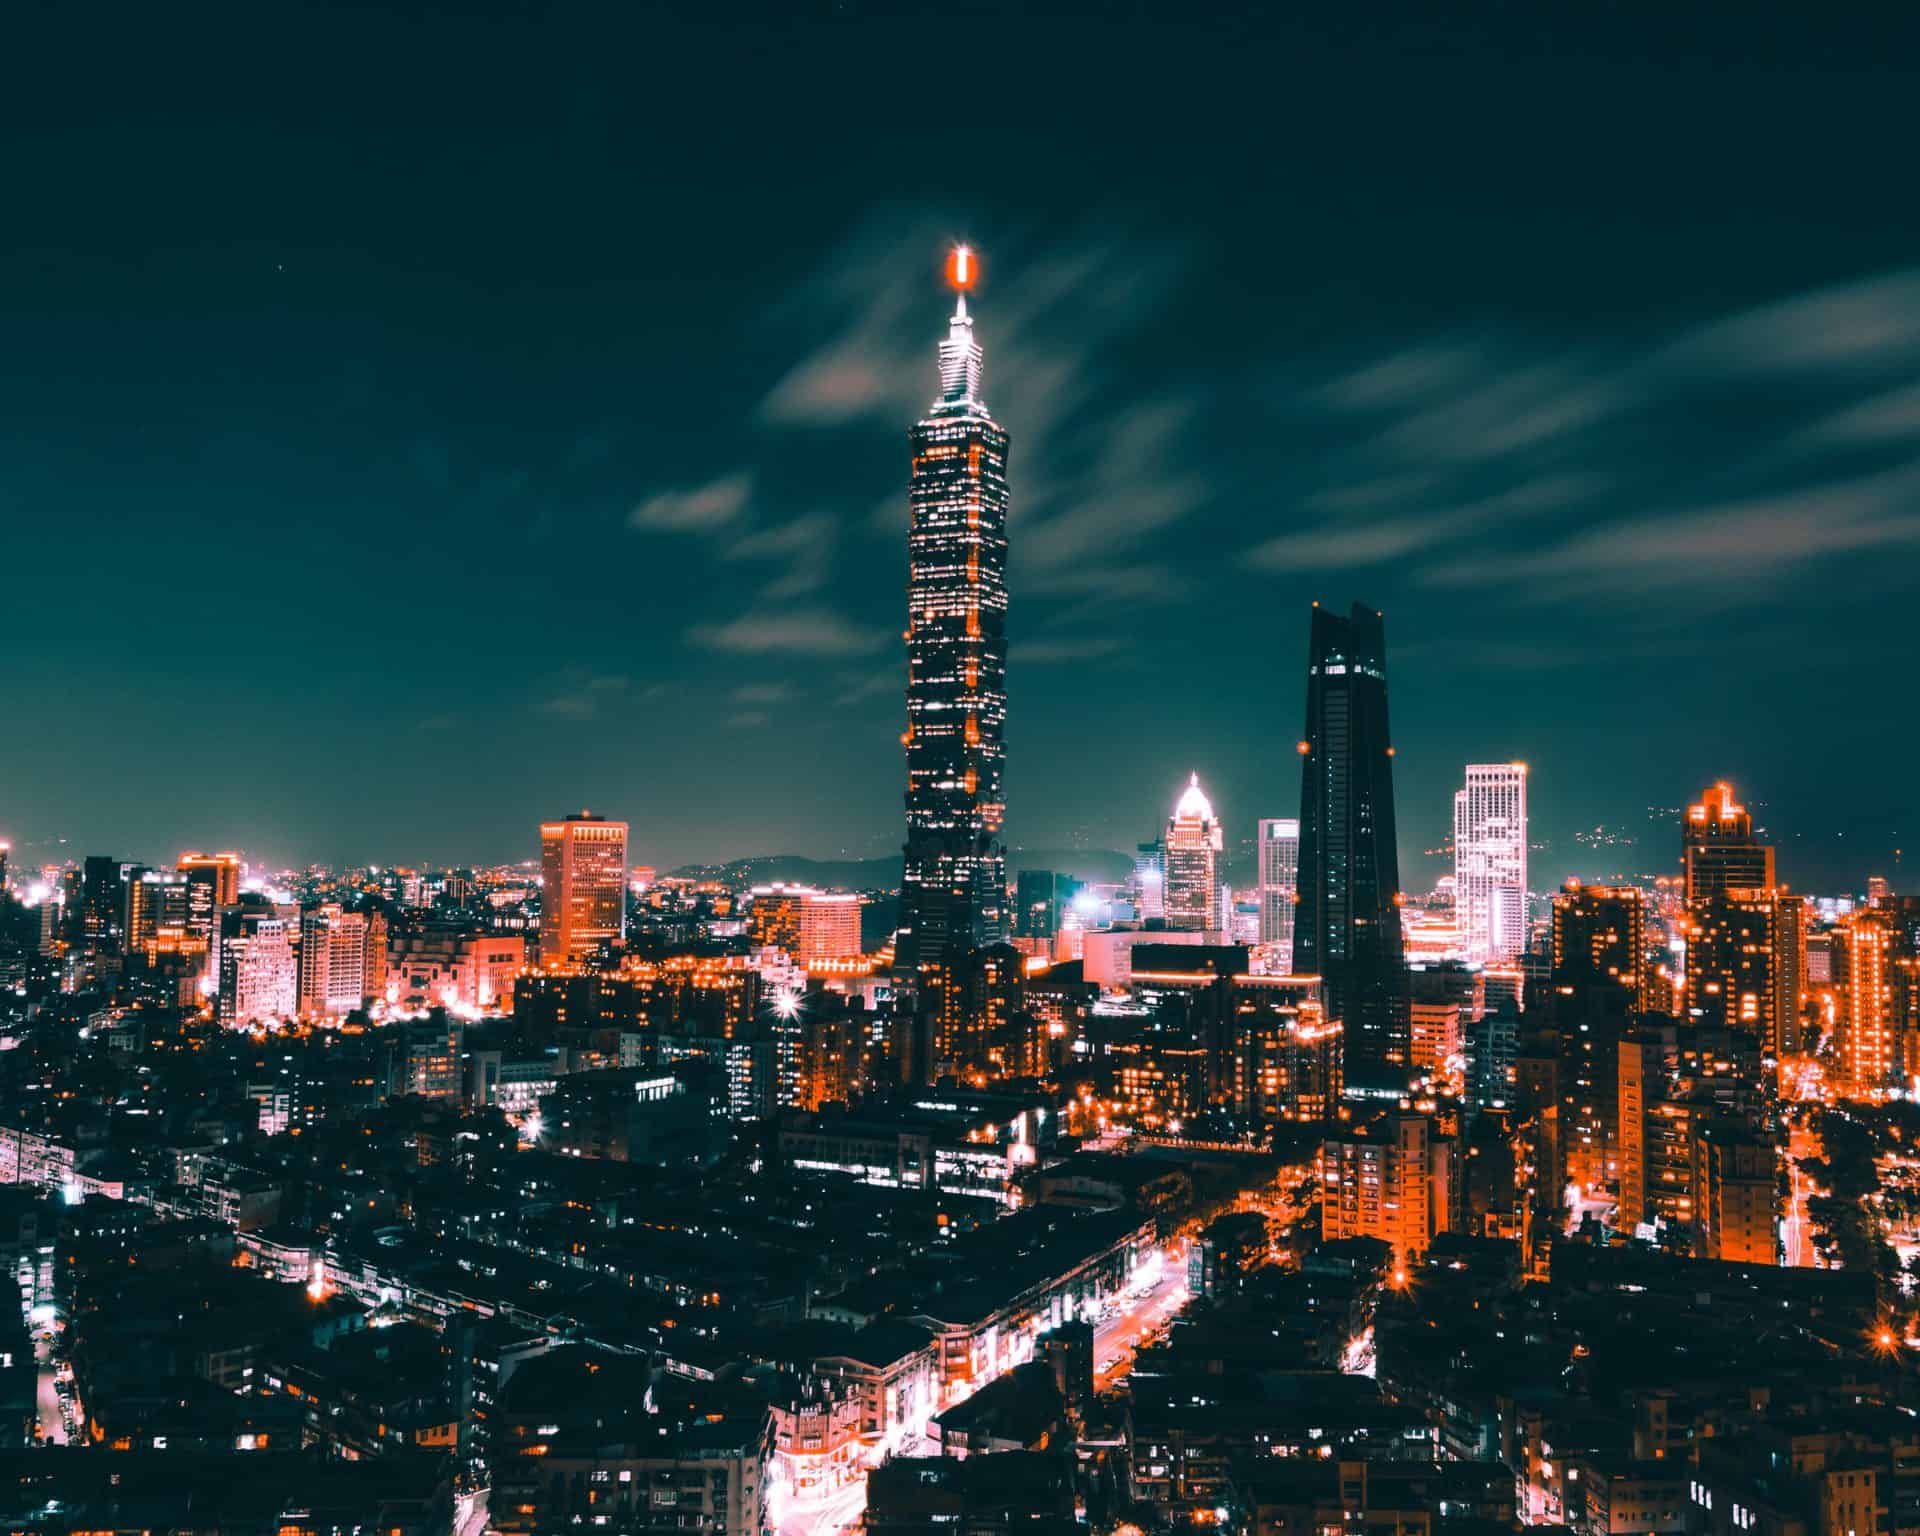 Cityscape of Taiwan at night